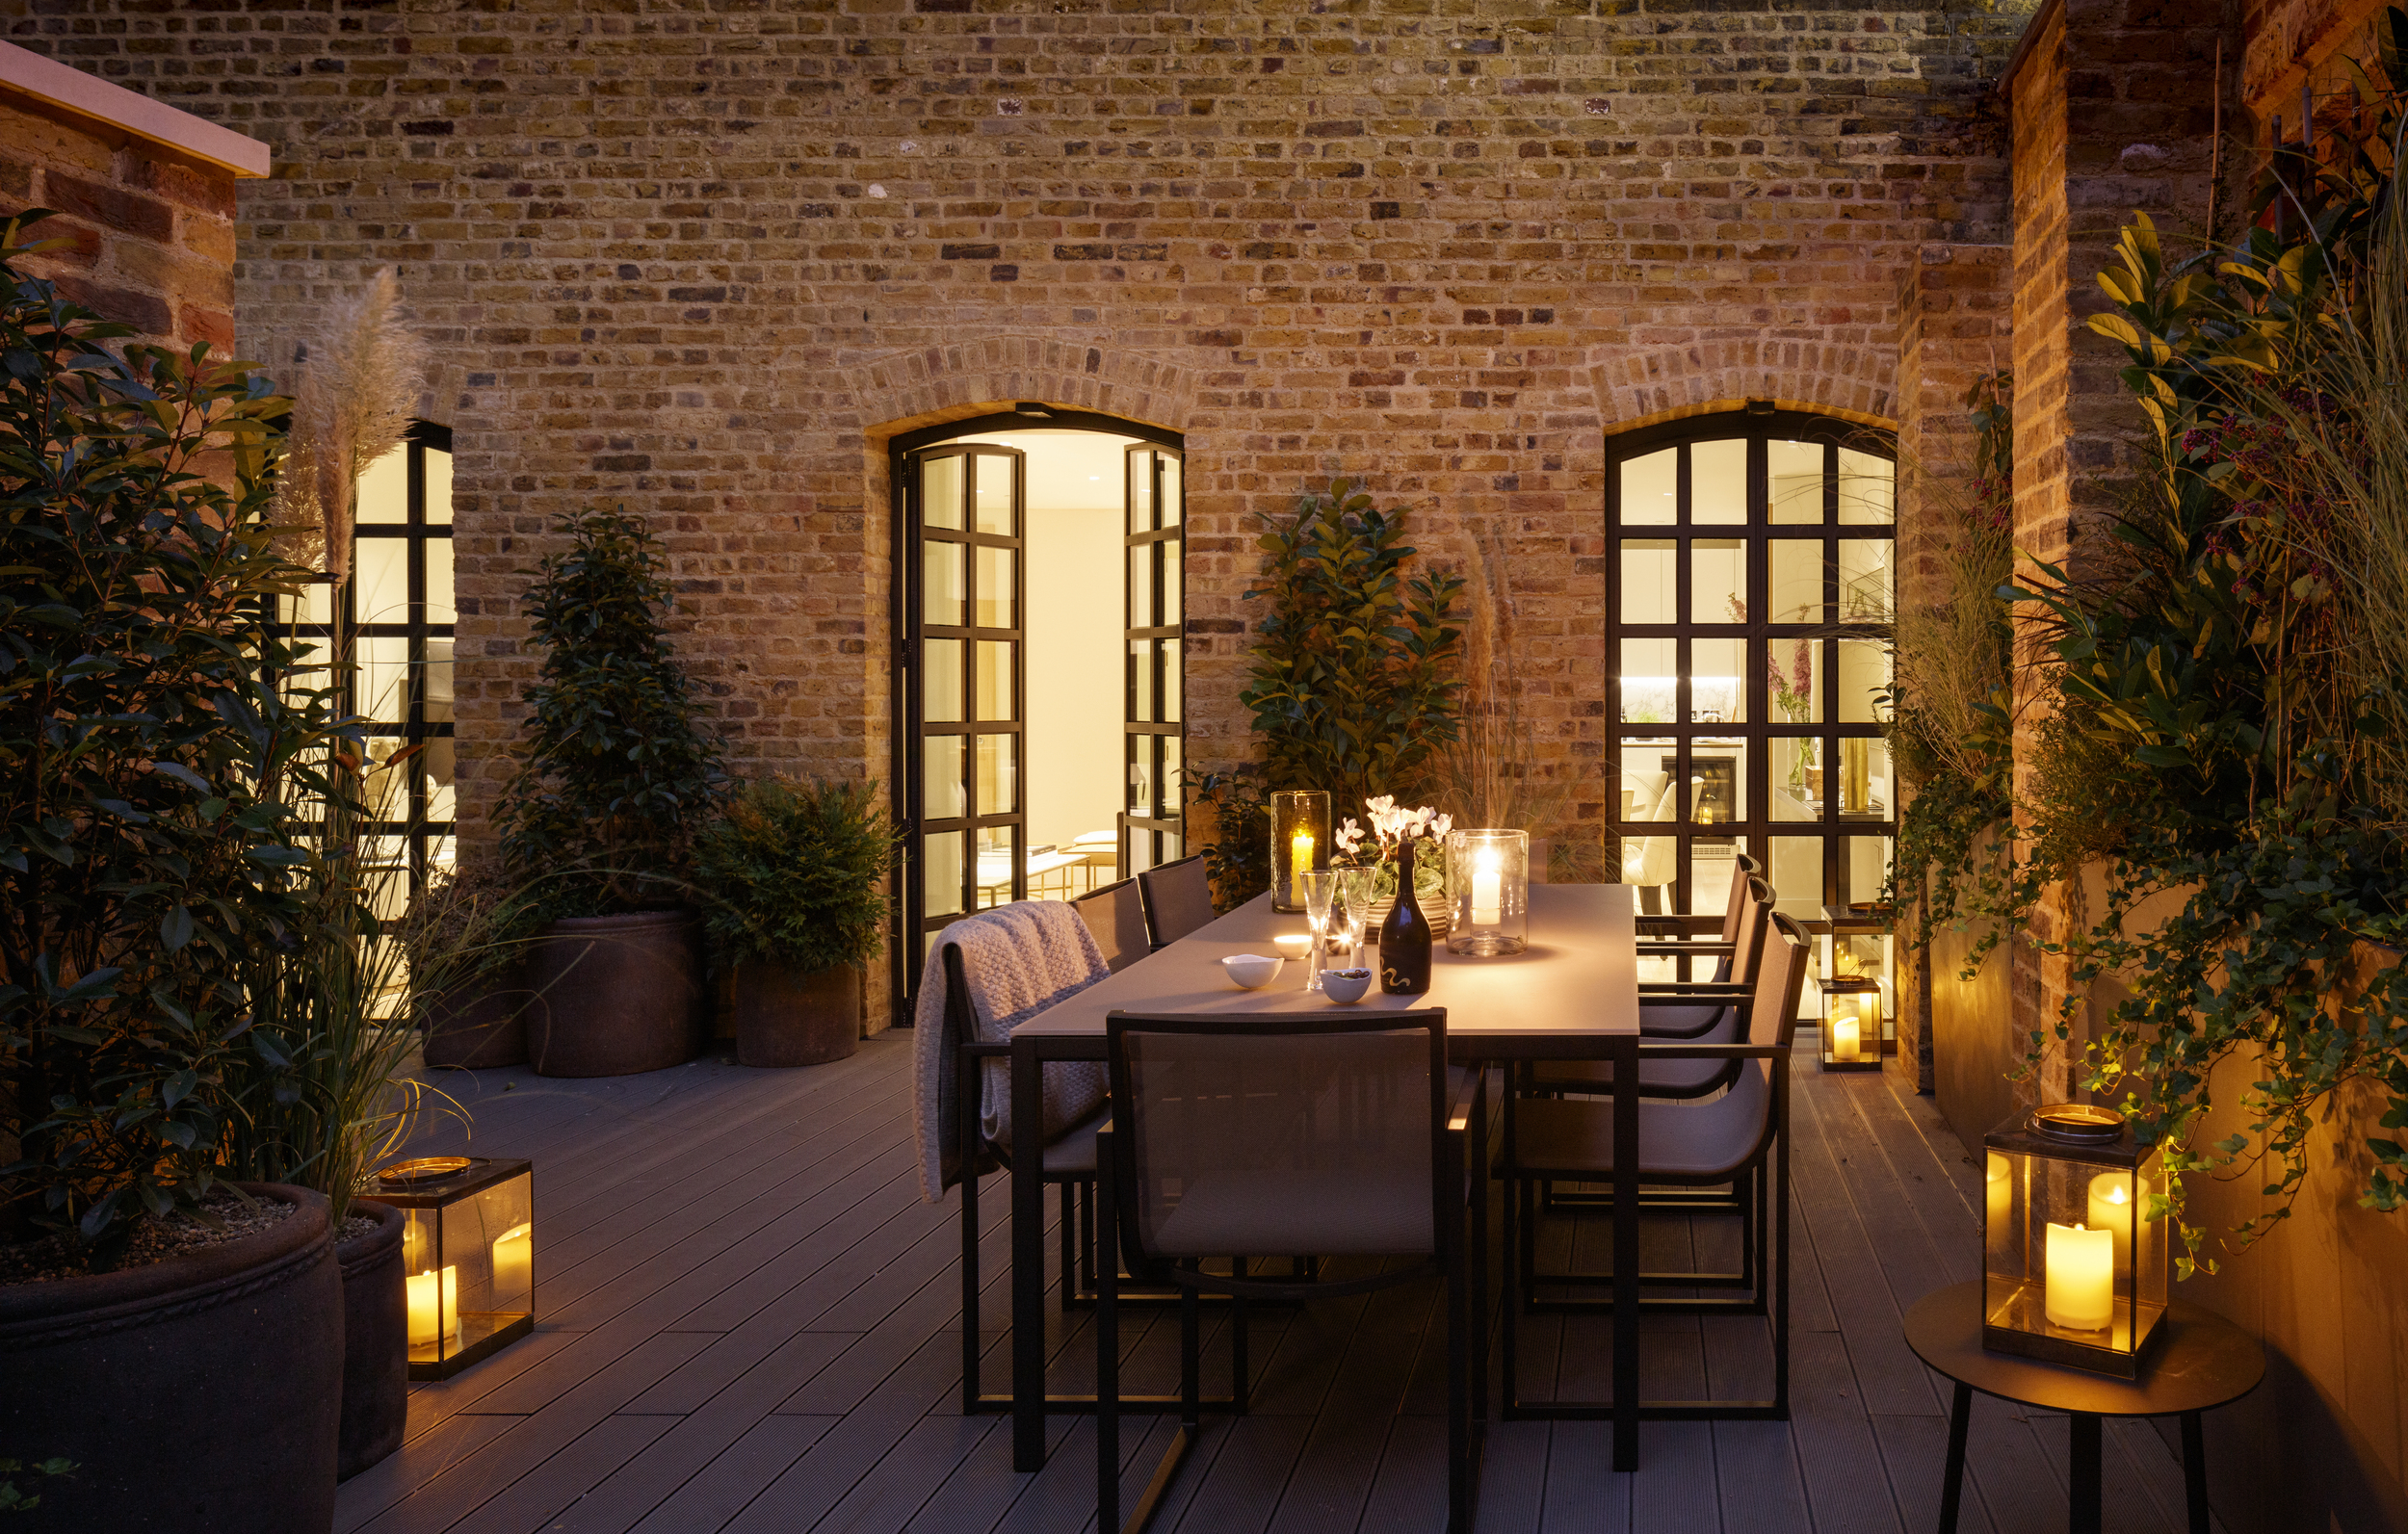 Candle lit outdoor garden with dining set